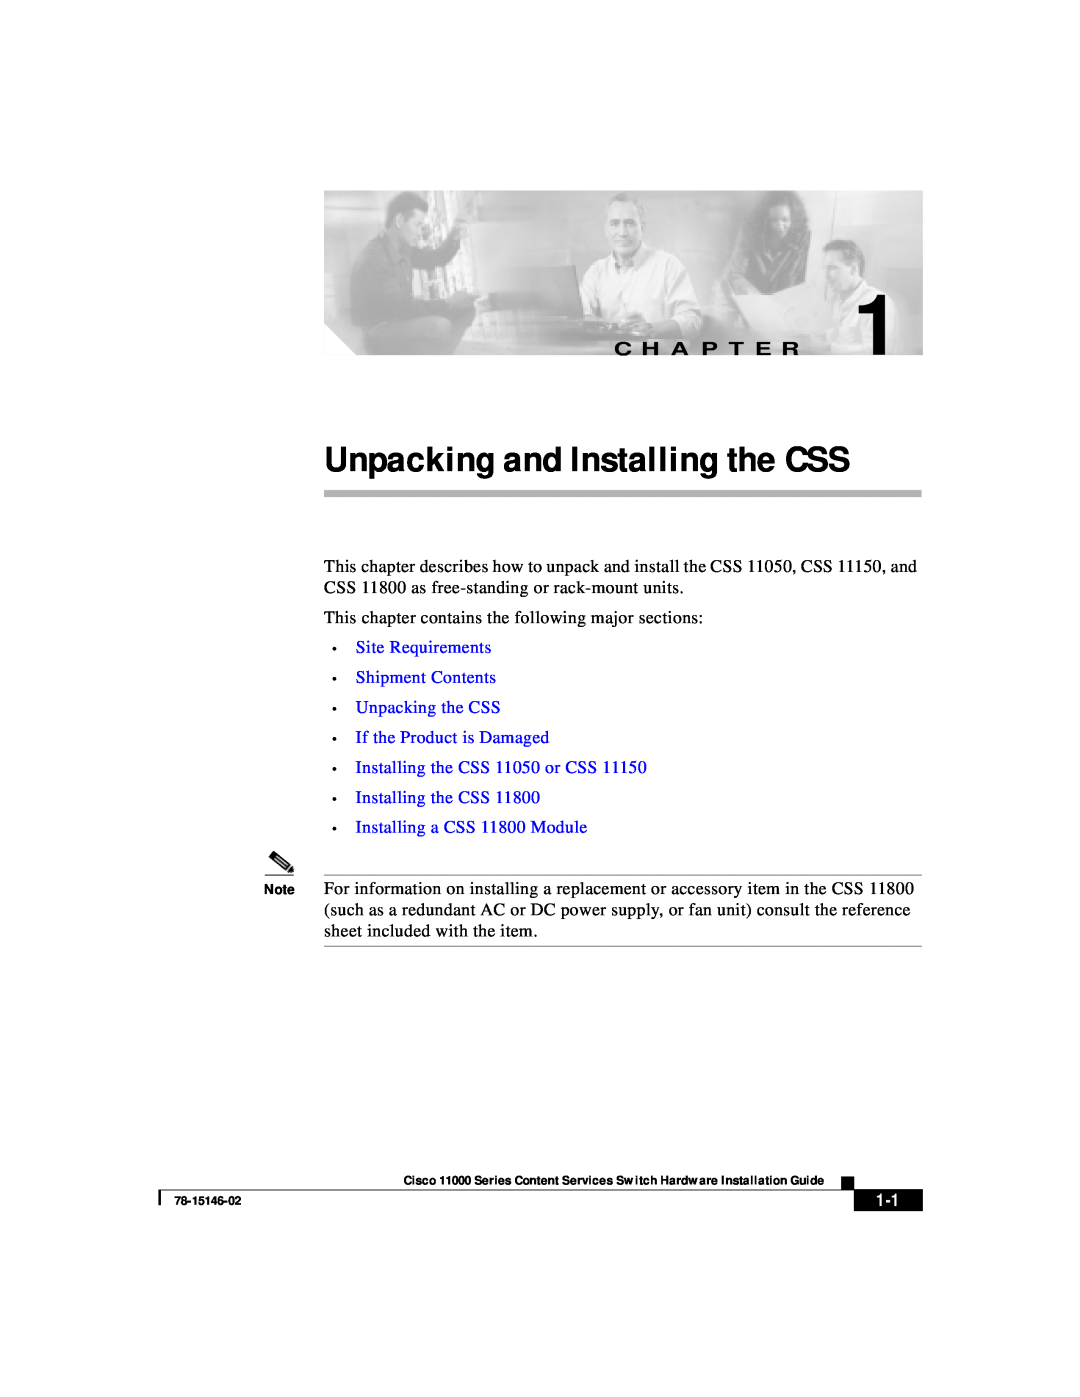 Cisco Systems 11000 Series manual Unpacking and Installing the CSS, C H A P T E R 